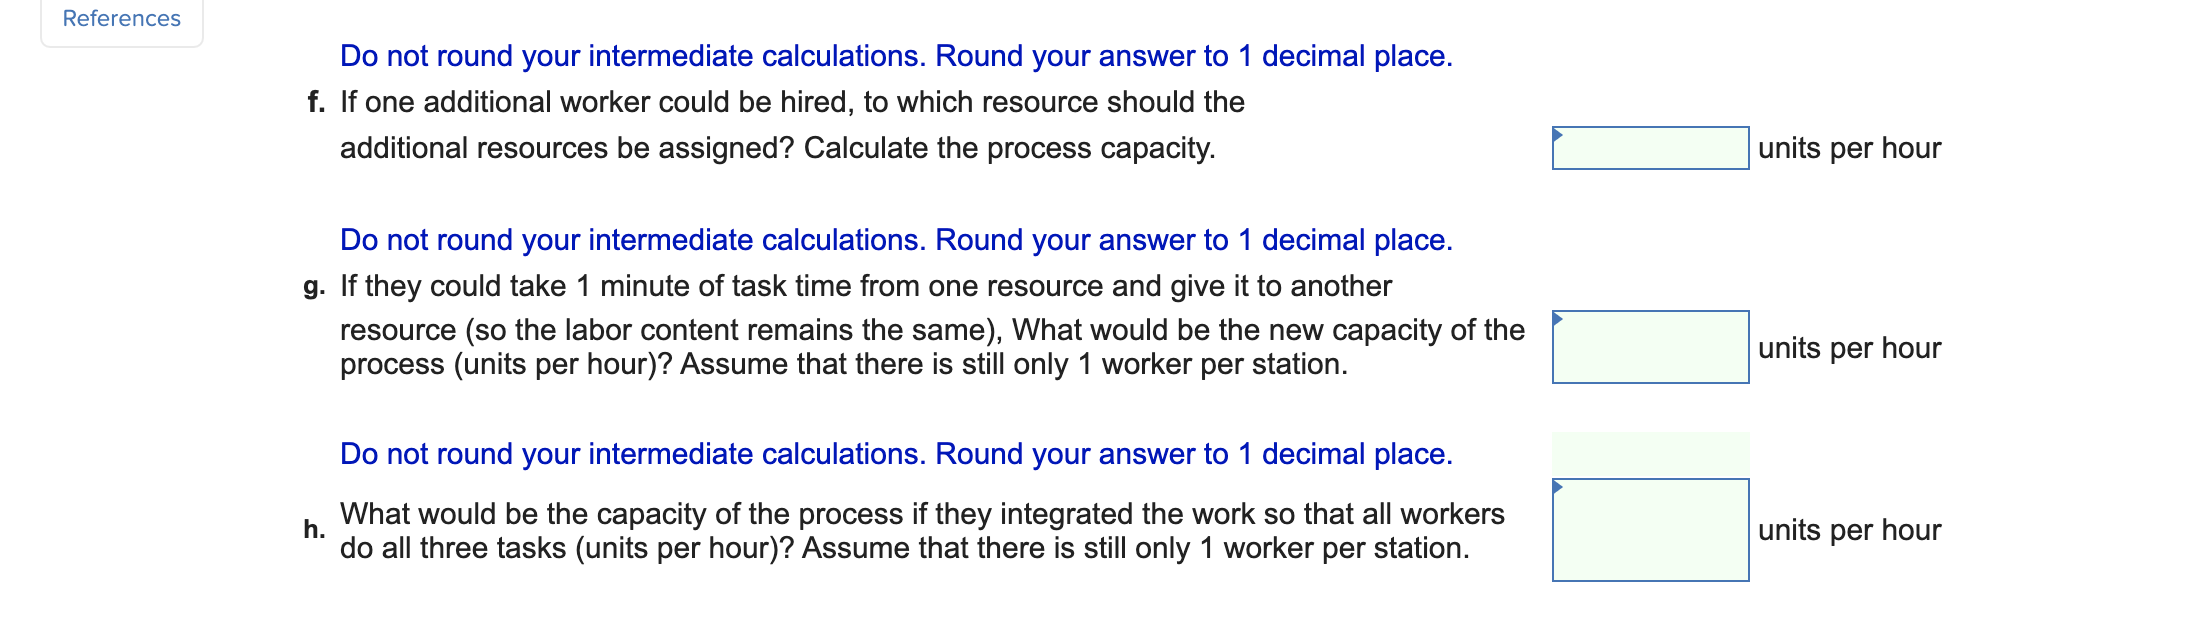 ReferencesDo not round your intermediate calculations. Round your answer to 1 decimal place.f. If one additional worker cou